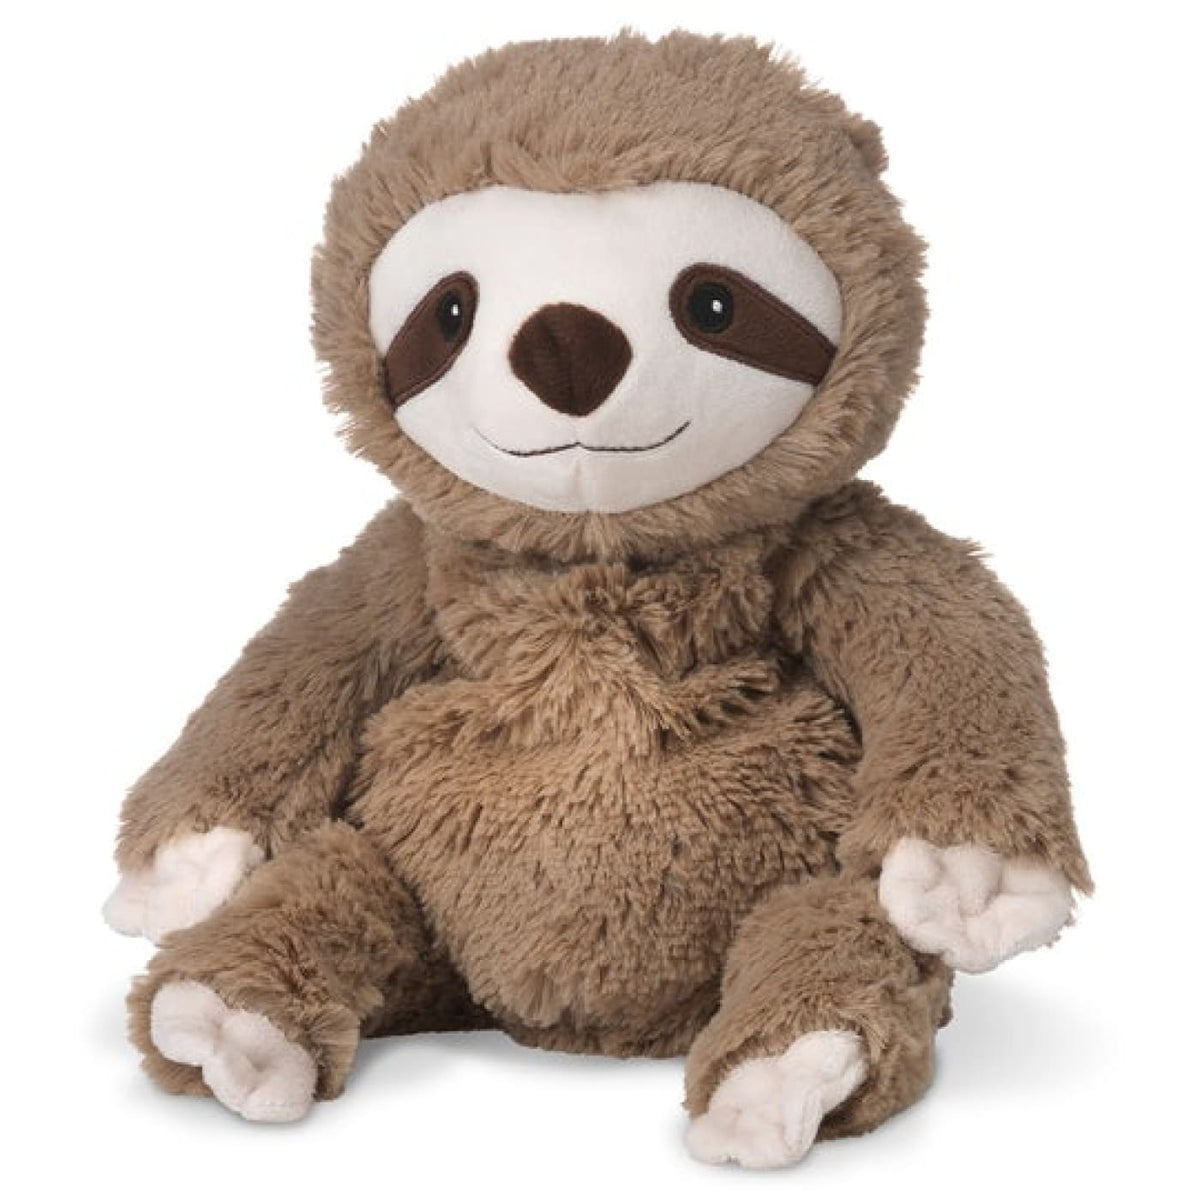 Warmies Cozy Plush - Brownie Sloth - Sloth - HEALTH &amp; HOME SAFETY - THERMOMETERS/MEDICINAL